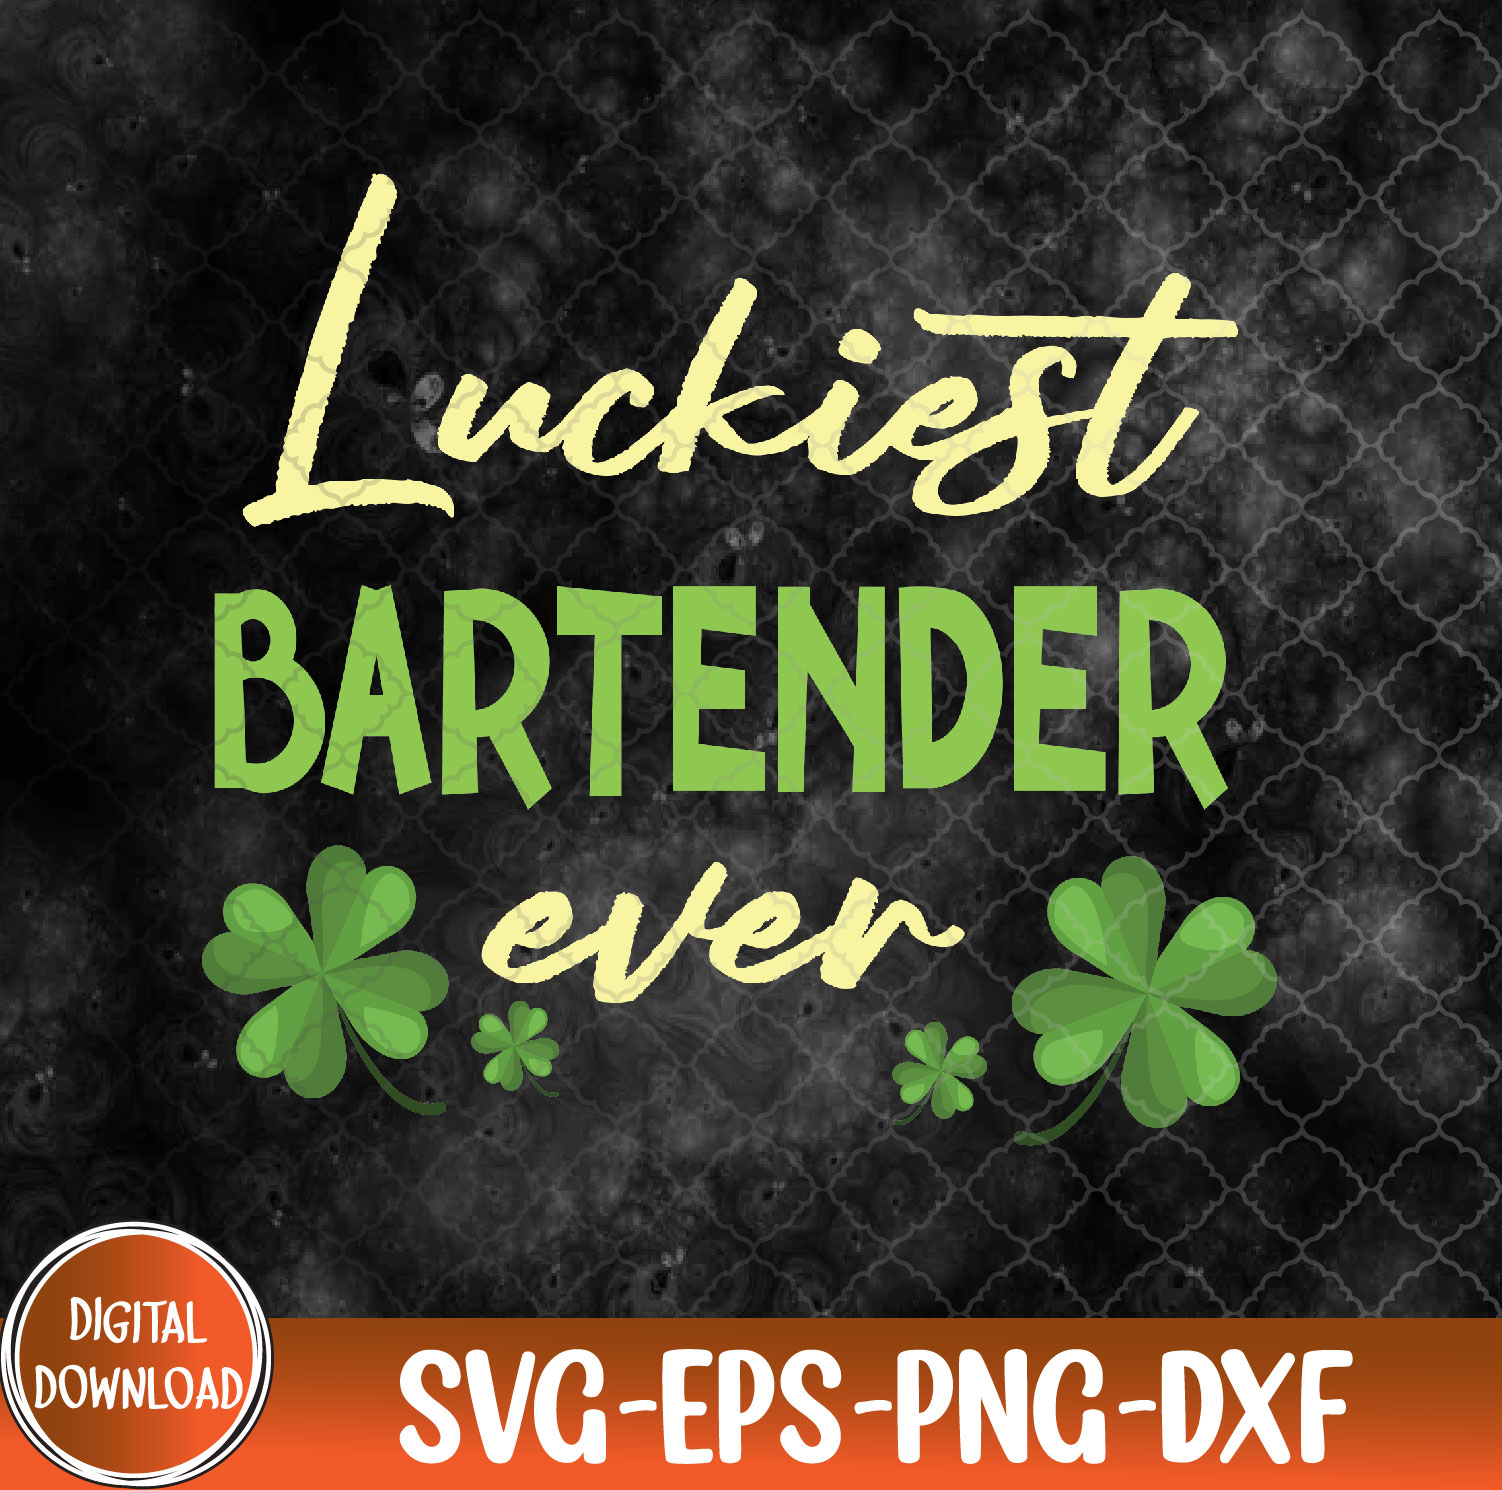 WTMNEW9file 09 192 Luckiest Bartender Ever St. Patrick's Day Themed Shamrock Svg, Eps, Png, Dxf